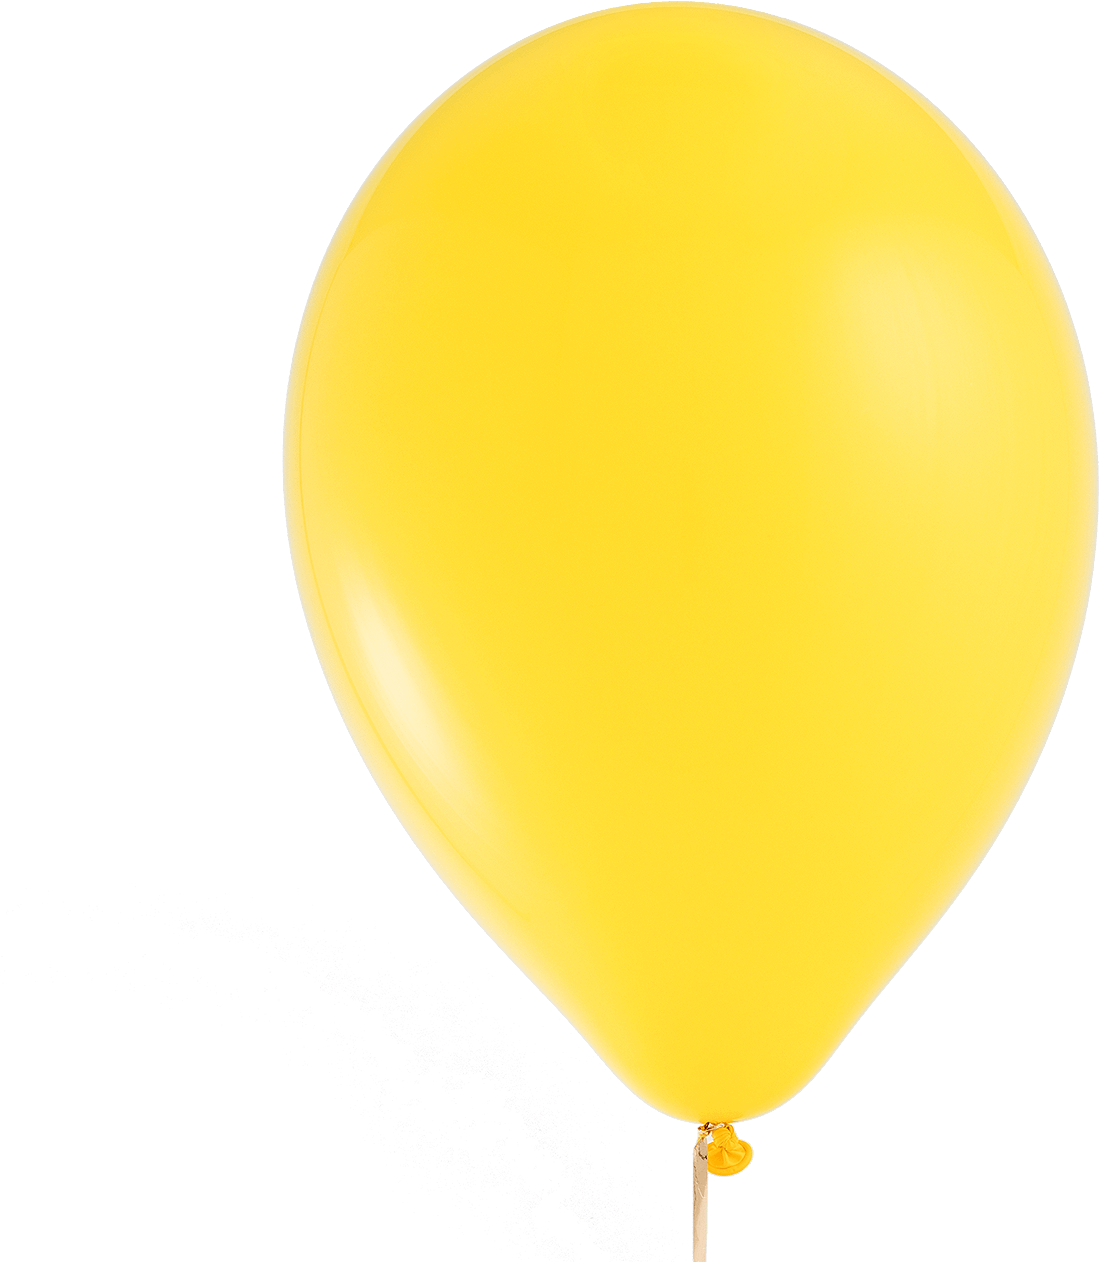 Download 11 Yellow Balloon Balloon Png Image With No Background Pngkey Com